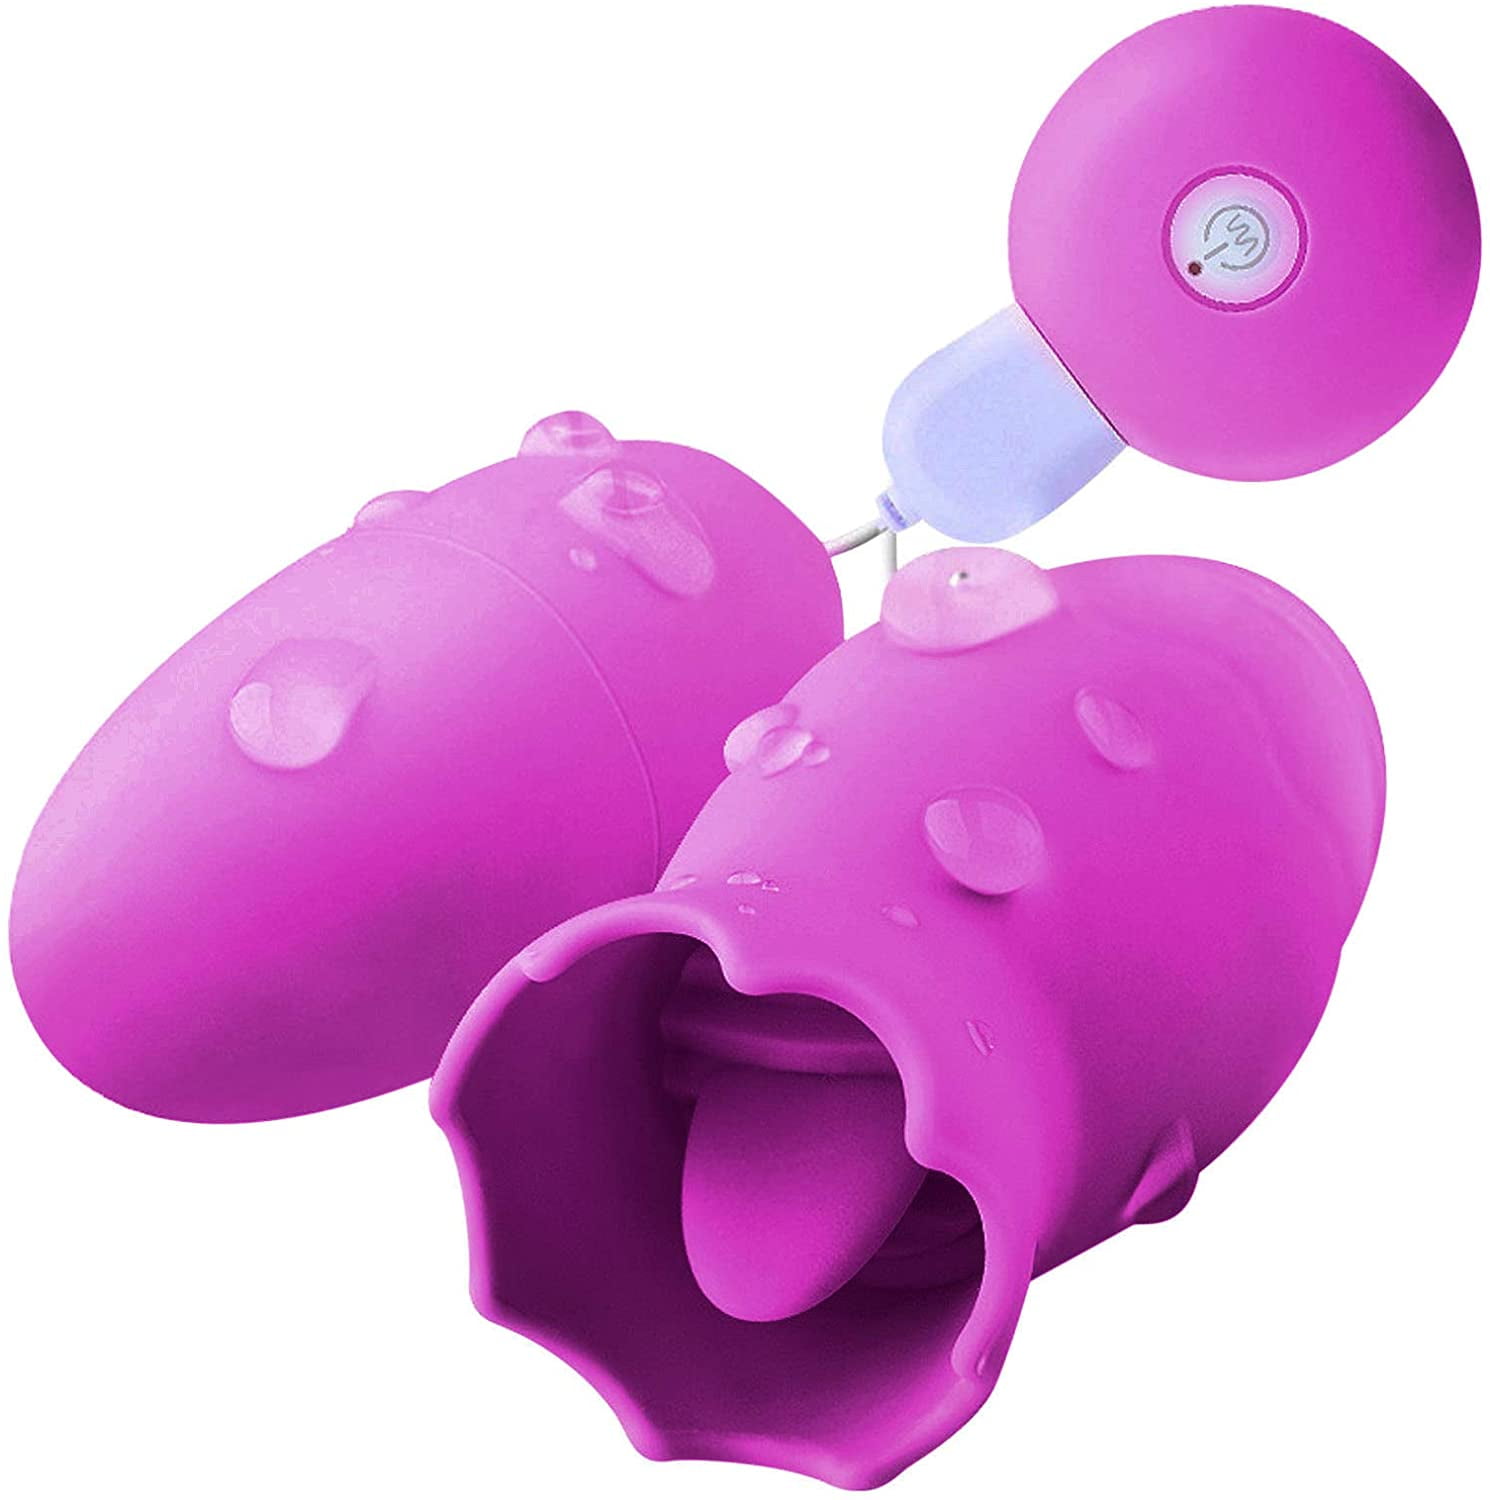 Clit Nipple Stimulator Vibrators for Women, Multi Vibration and Tongue Licking Modes Female Adult Sex Toys for Women, G Spot Clitoral Waterproof Sexual Pleasure Tools